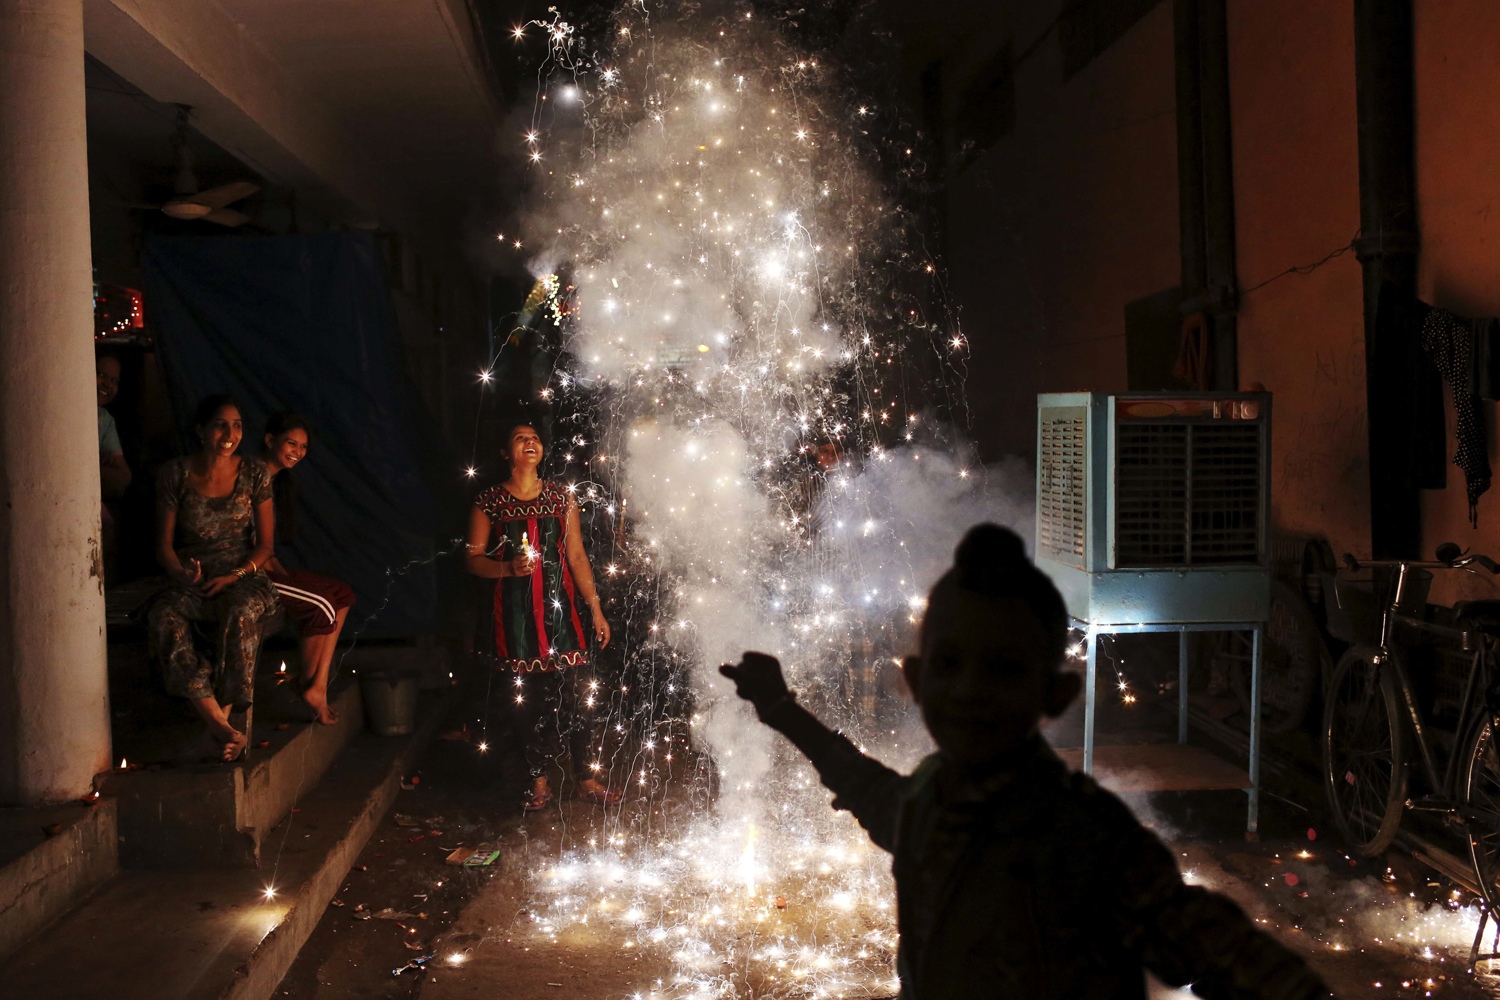 Image: Nov. 13, 2012. An Indian family lights firecrackers during the festival of Diwali in New Delhi.